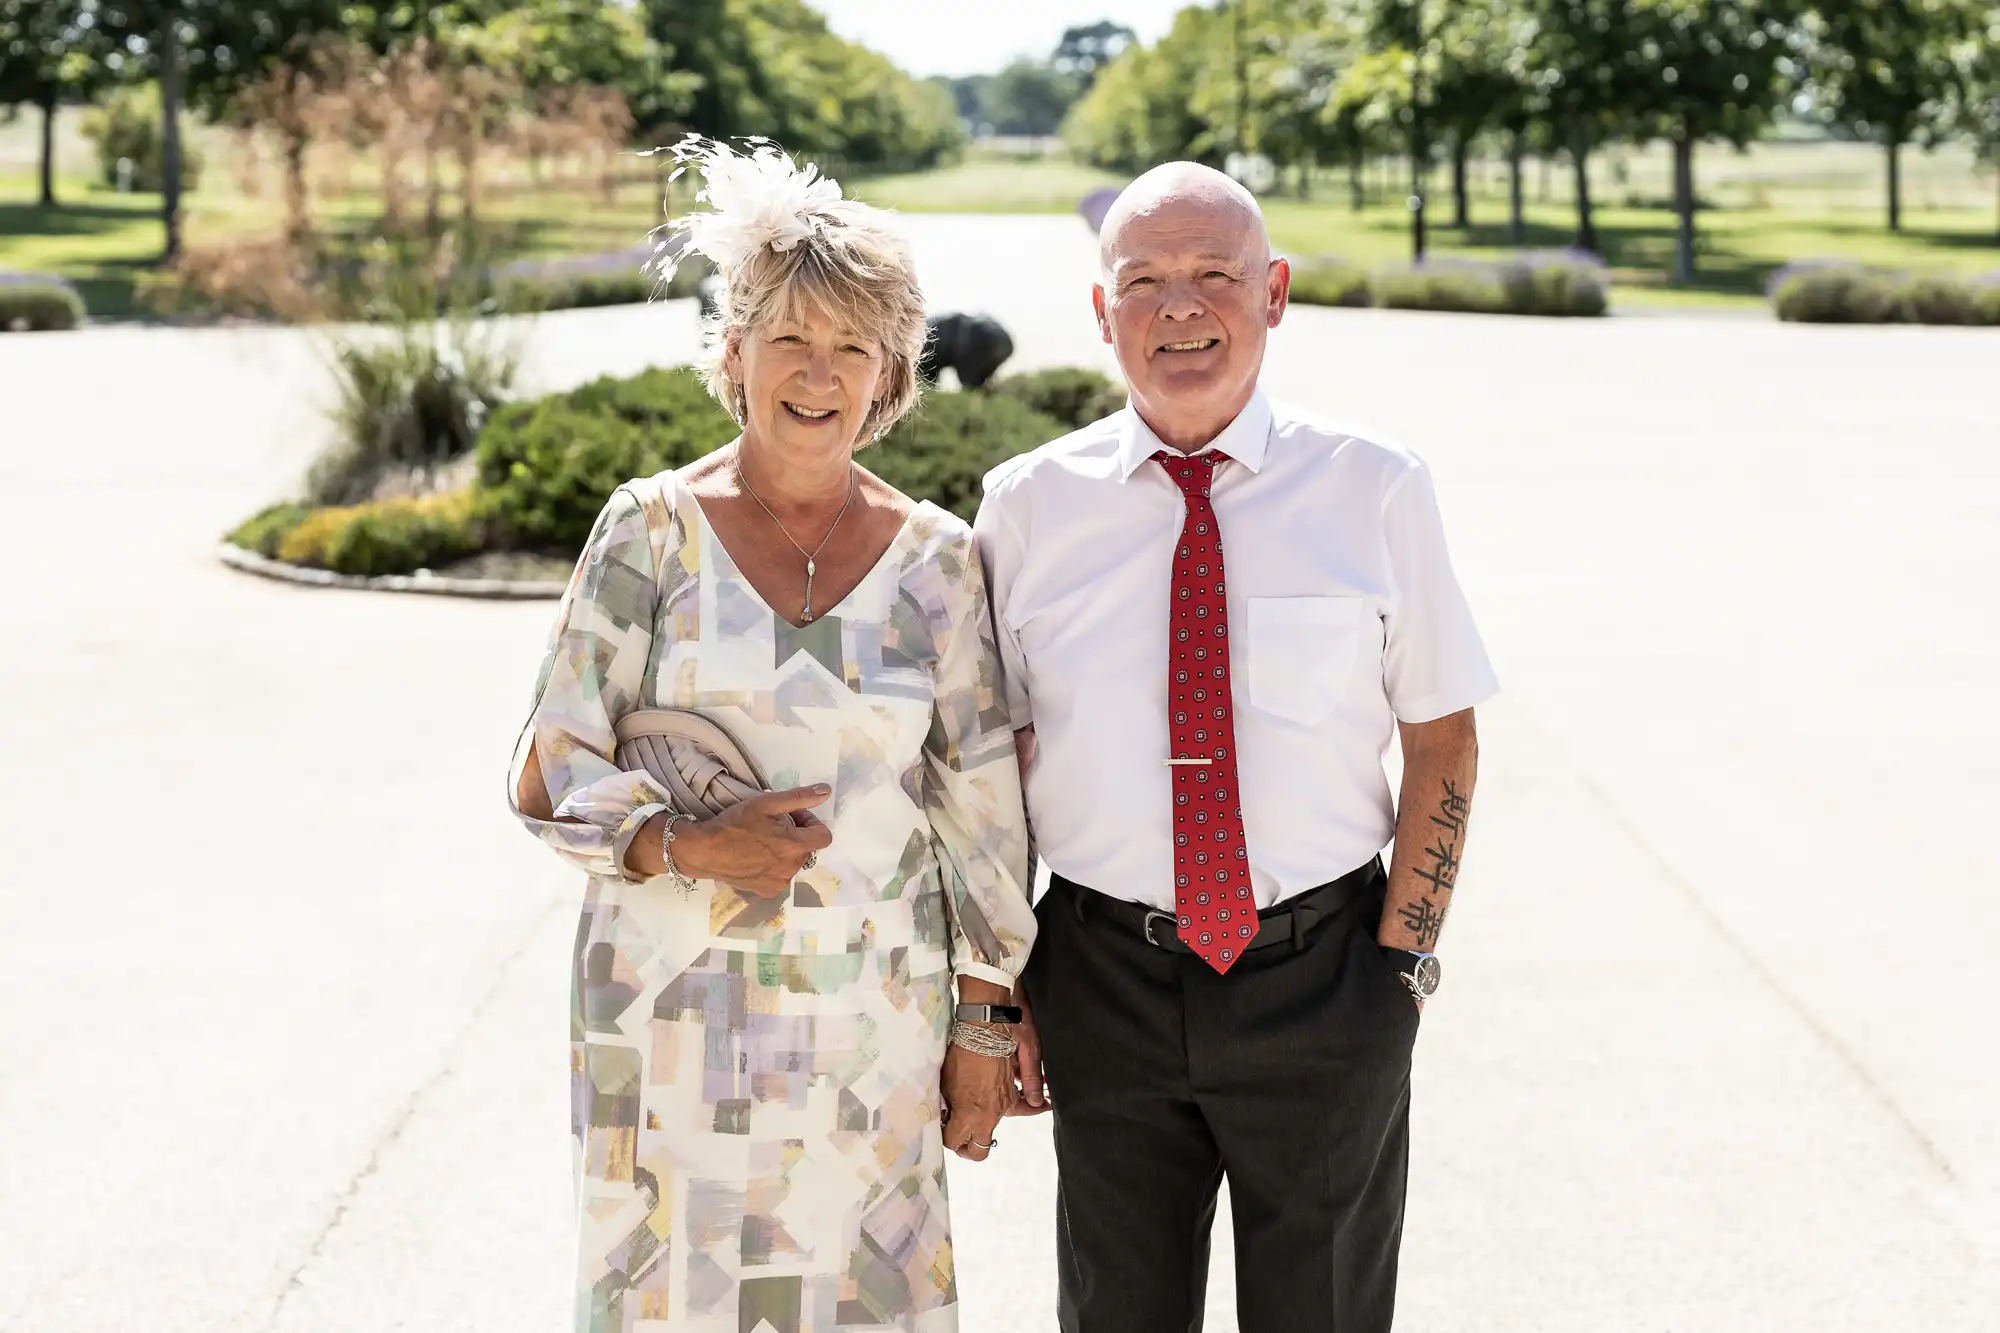 An elderly couple smiling and walking arm in arm outdoors, the woman in a floral dress and fascinator, the man in a white shirt and red tie.